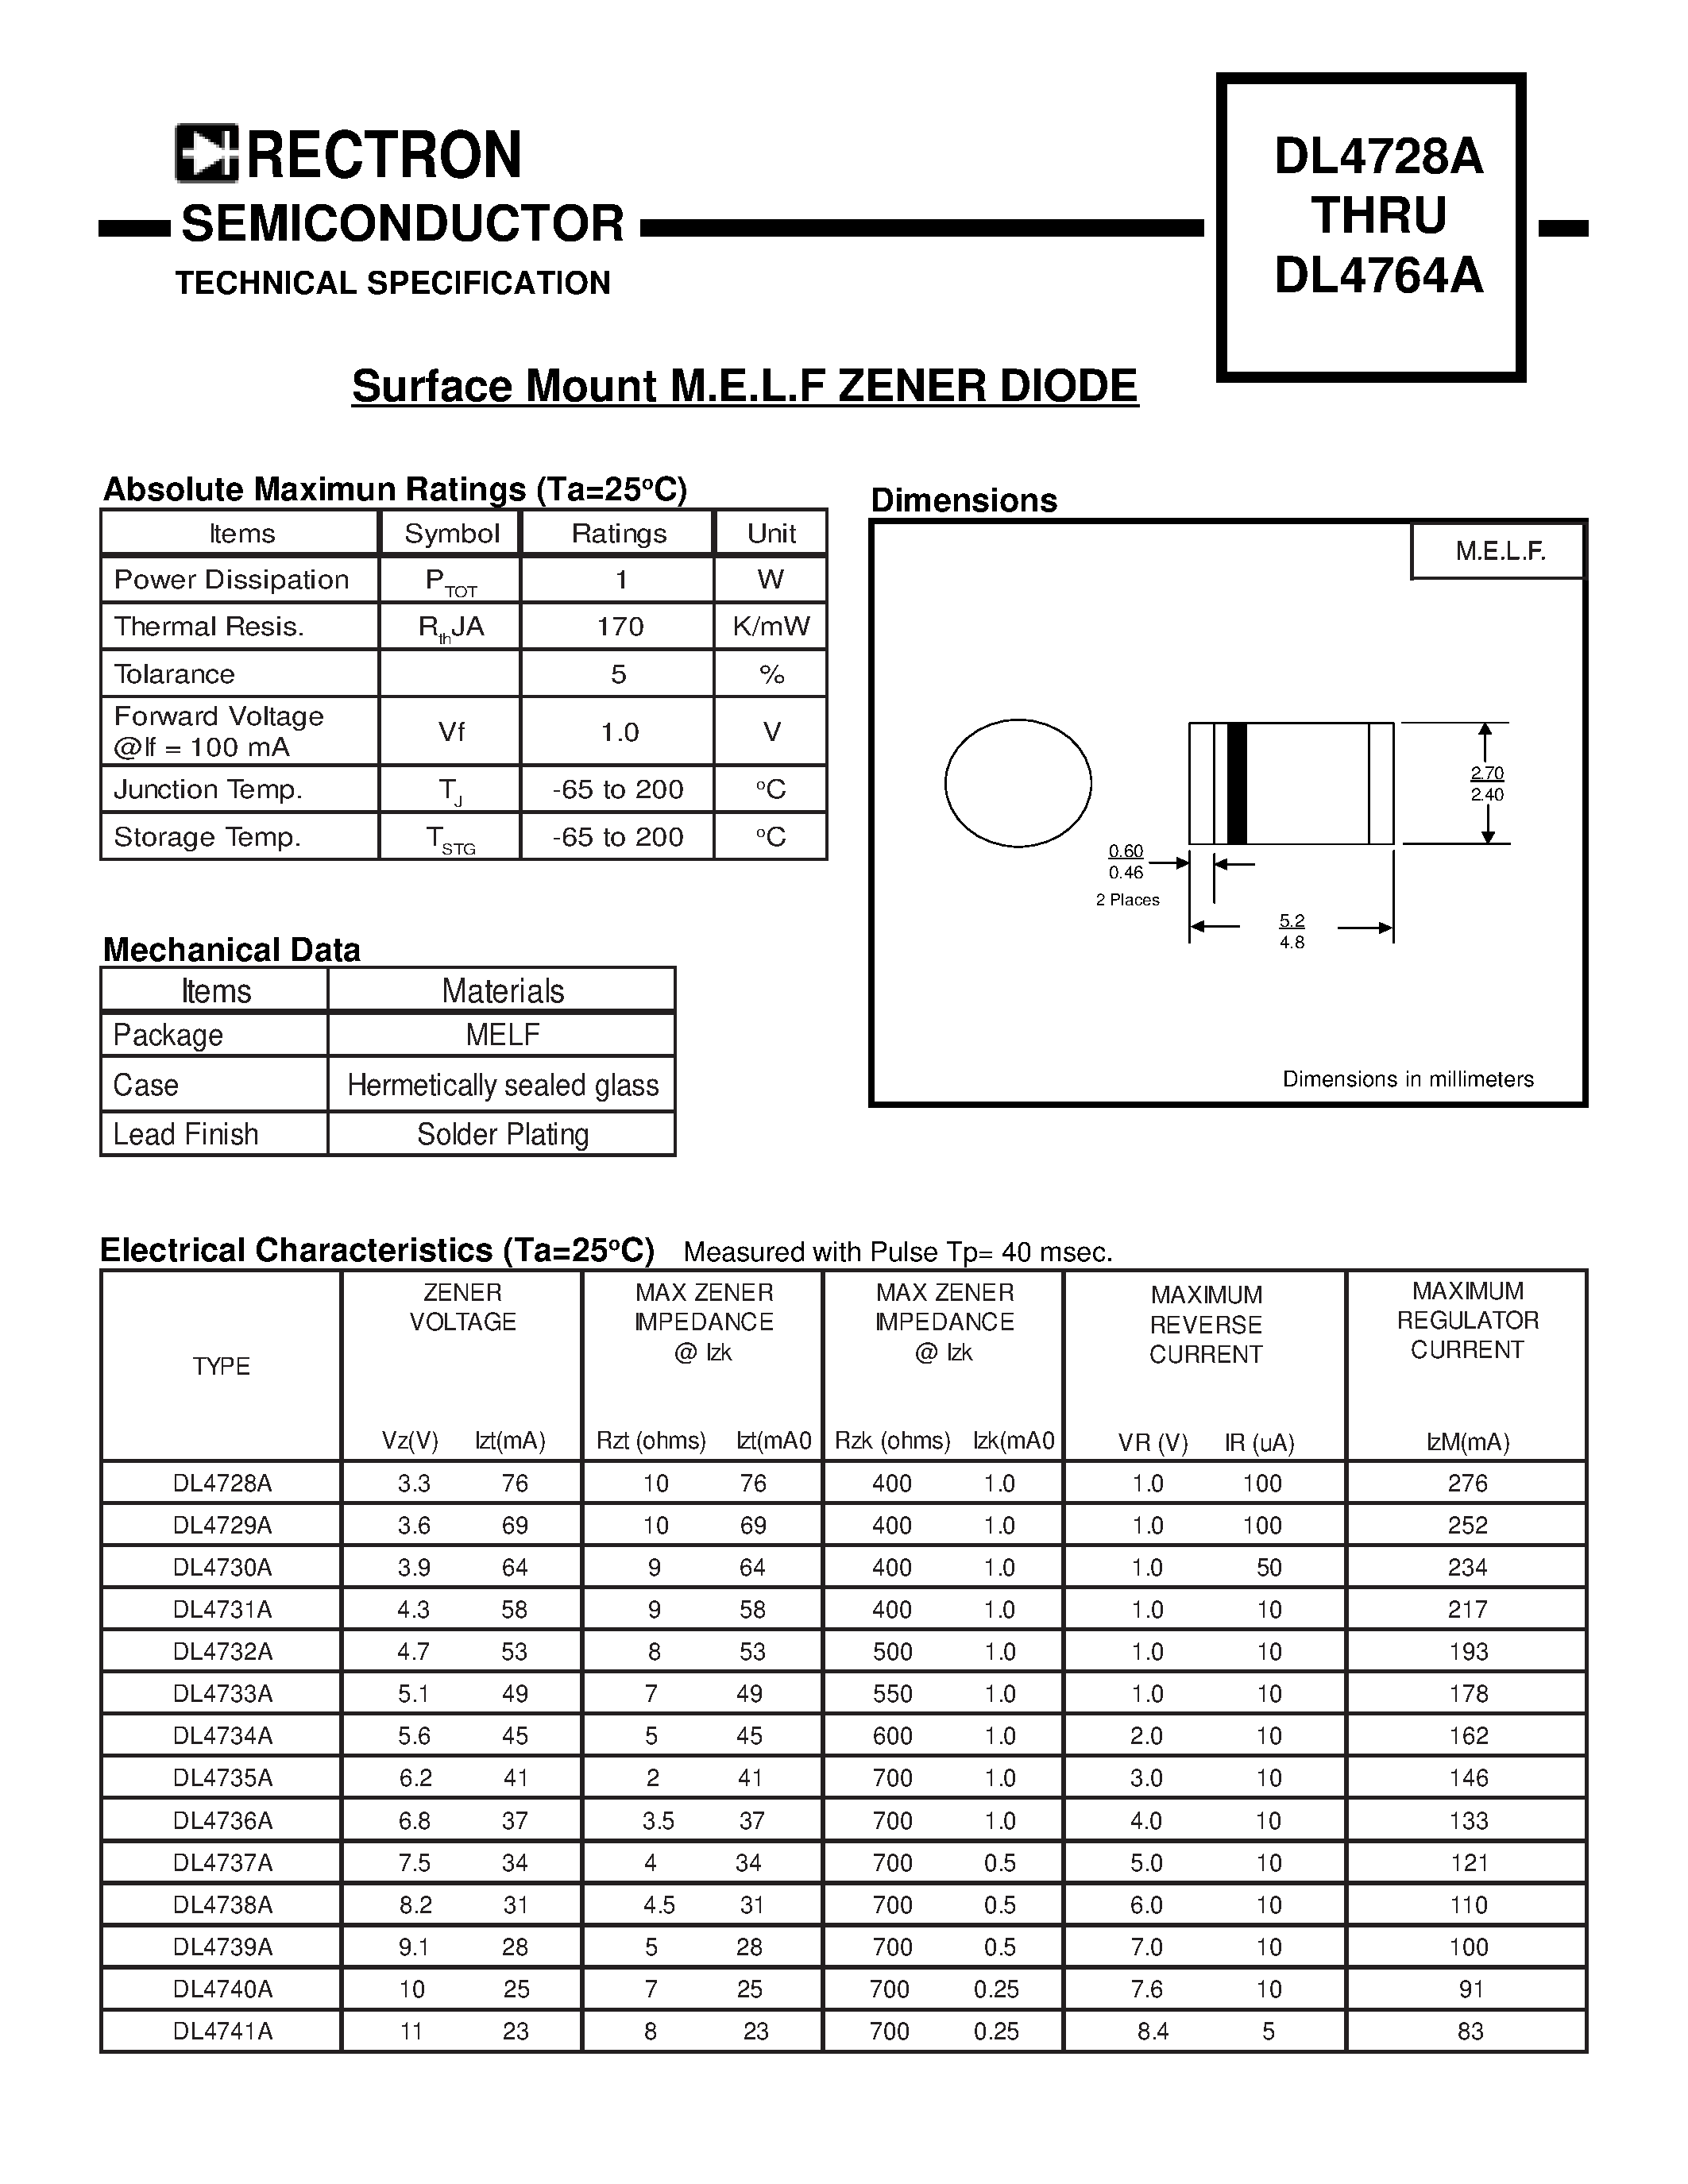 Datasheet DL4761A - Surface Mount M.E.L.F ZENER DIODE page 1